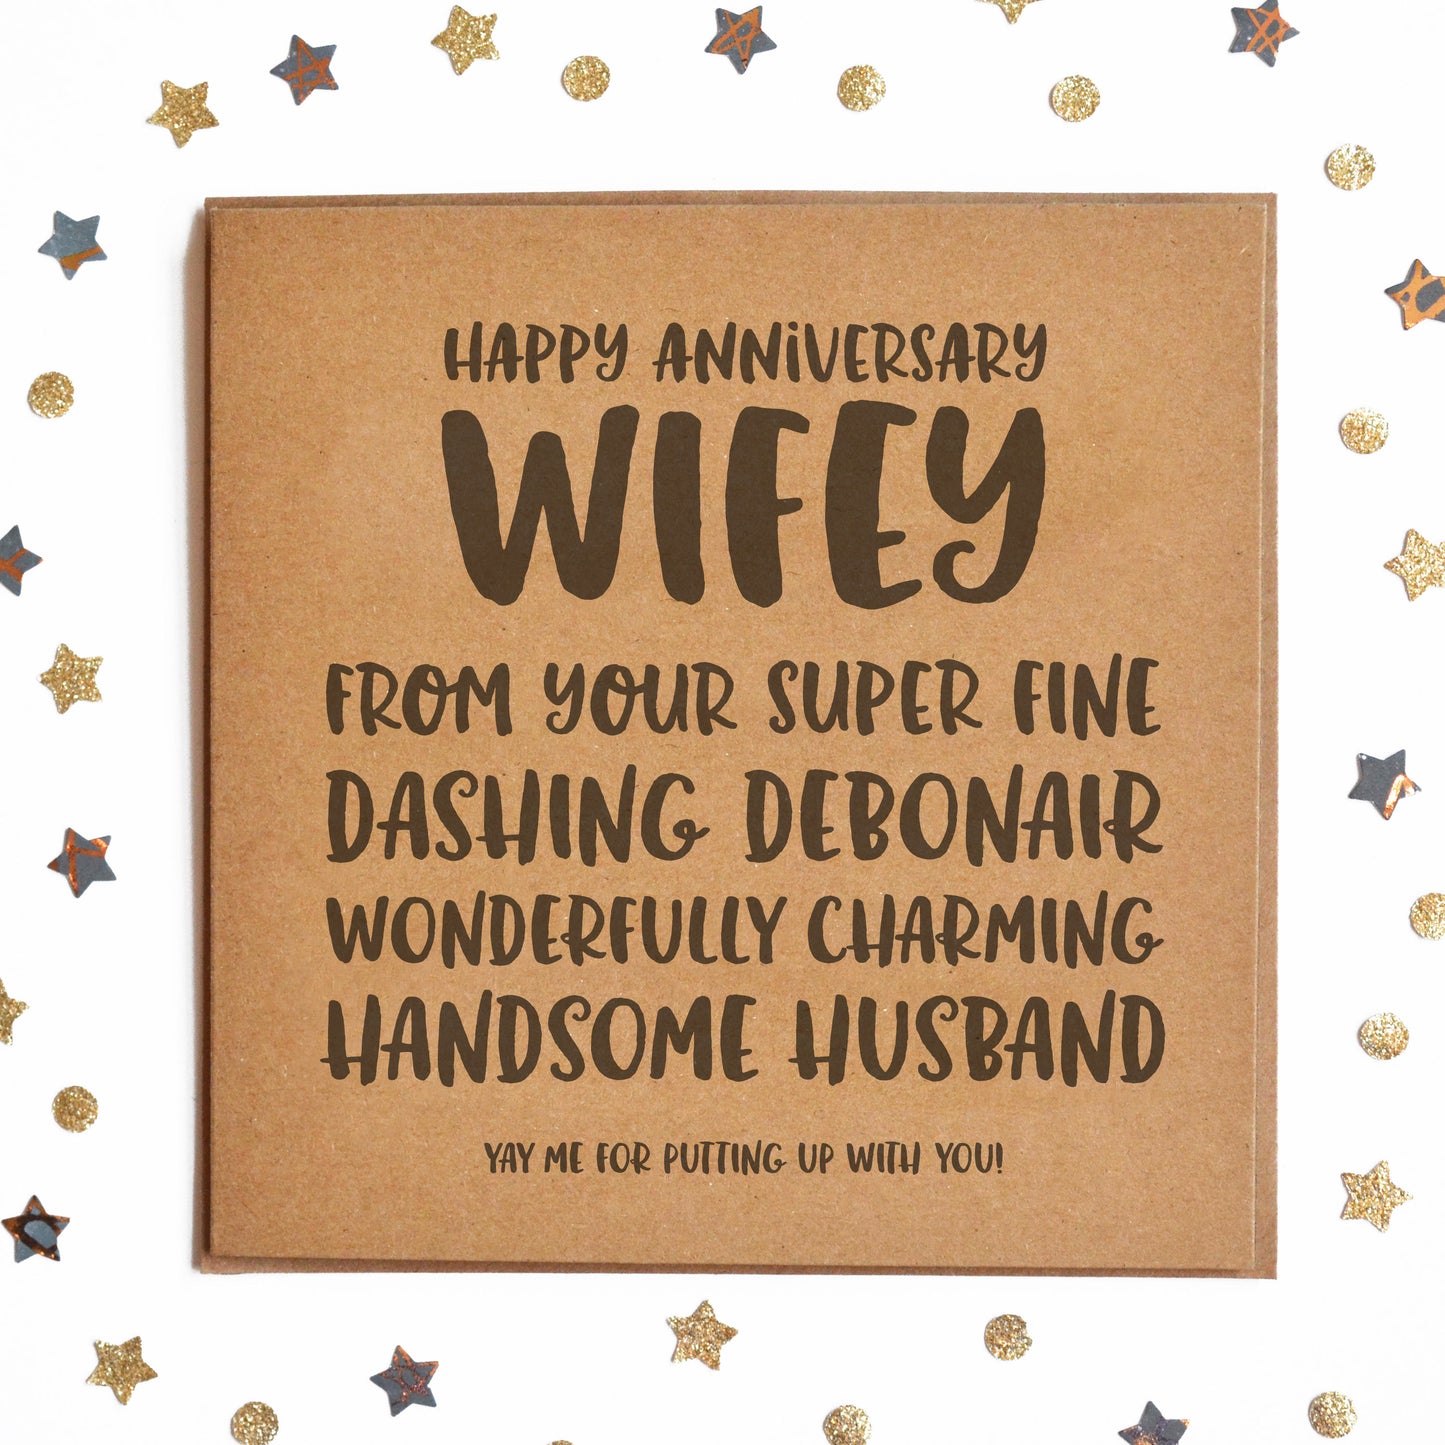 "HAPPY ANNIVERSARY WIFEY! FROM YOUR SUPER FINE, DASHING DEBONAIR, WONDERFULLY CHARMING HANDSOME HUSBAND! YAY ME FOR PUTTING UP WITH YOU! Funny Card